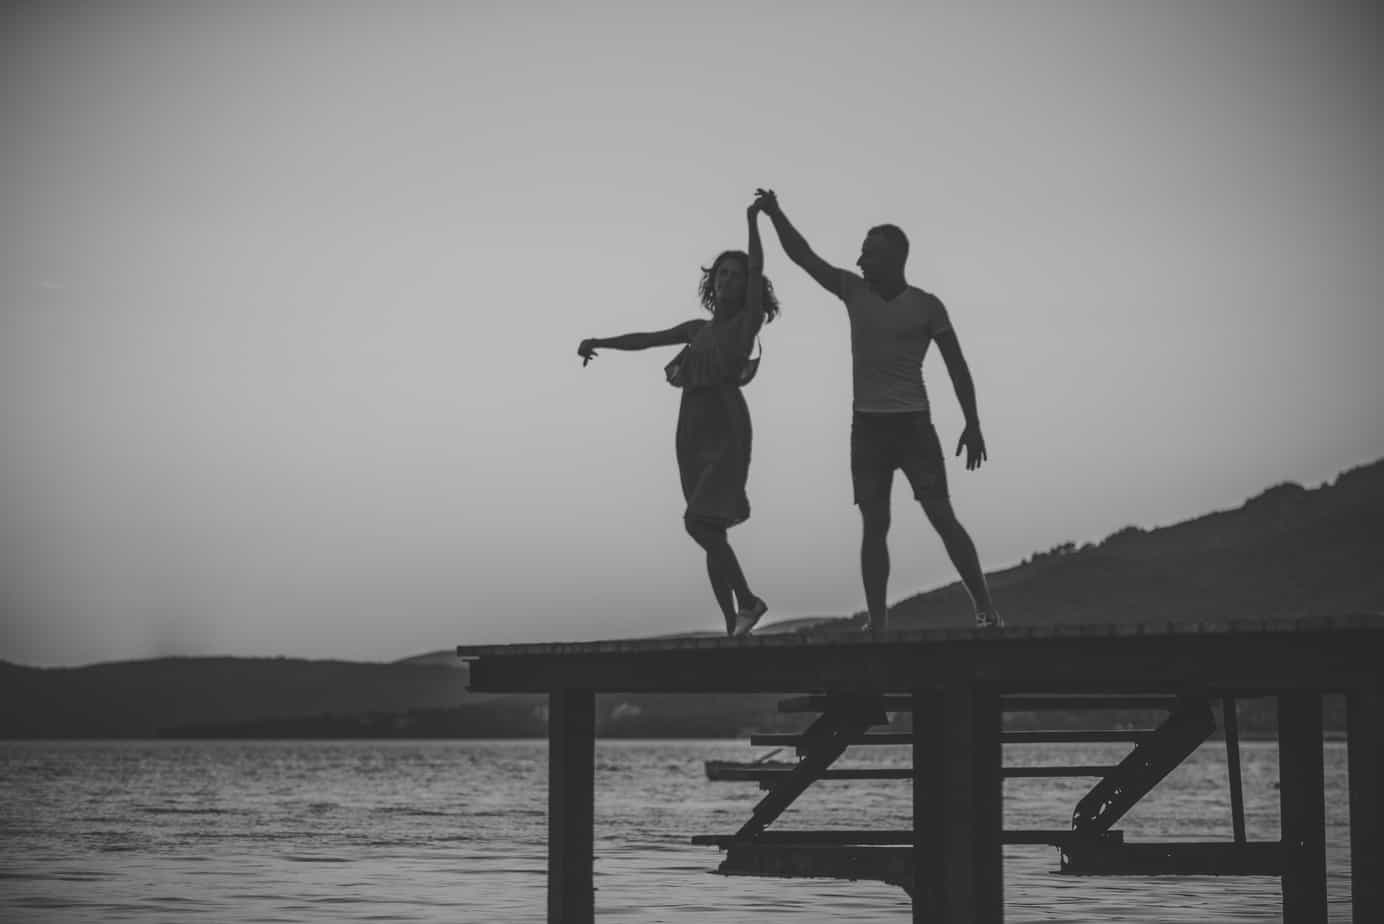 A man and woman dance on a boardwalk by the lake.